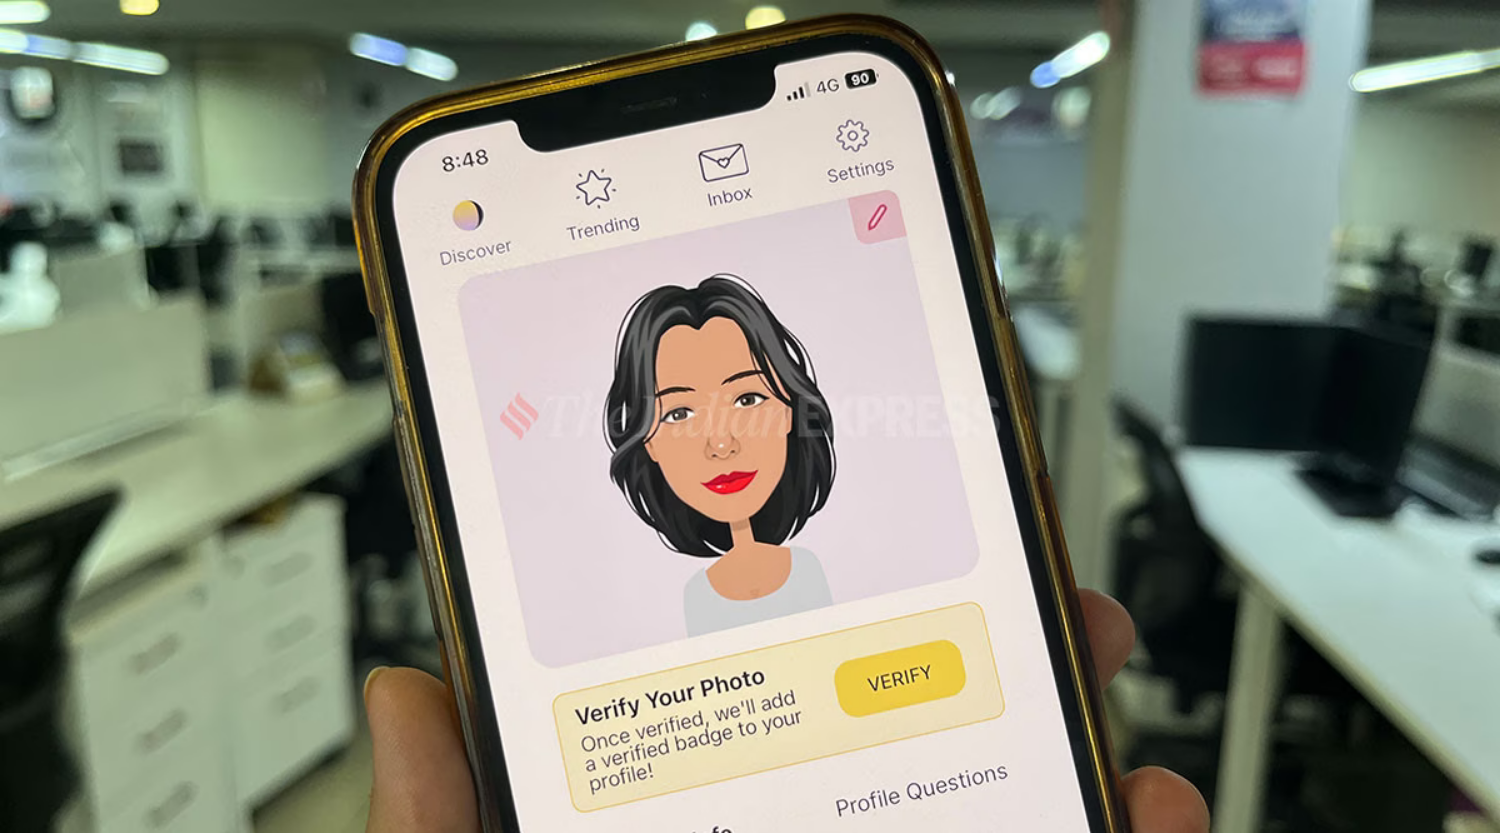 ‘Avatars’ and audio: How the SwoonMe app is approaching online dating differently